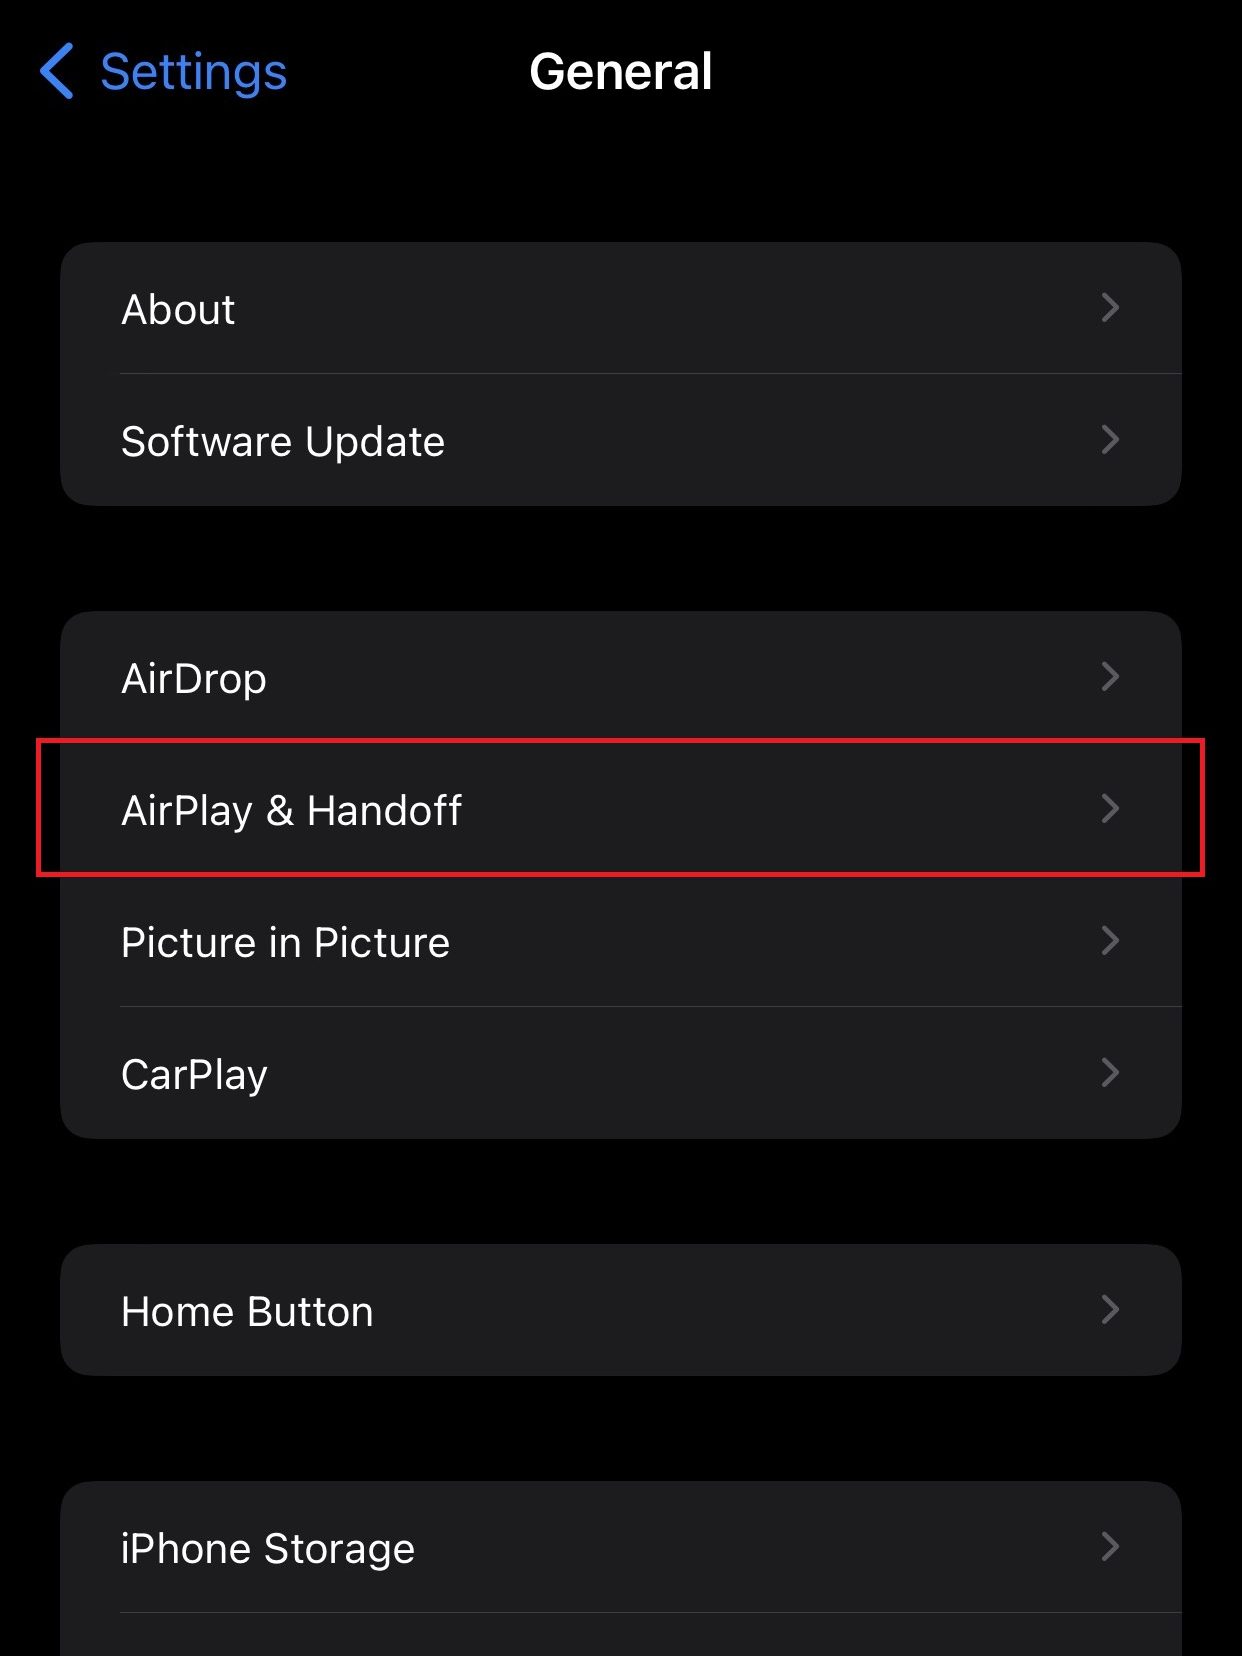 Under General settings click on AirPlay & Handoff